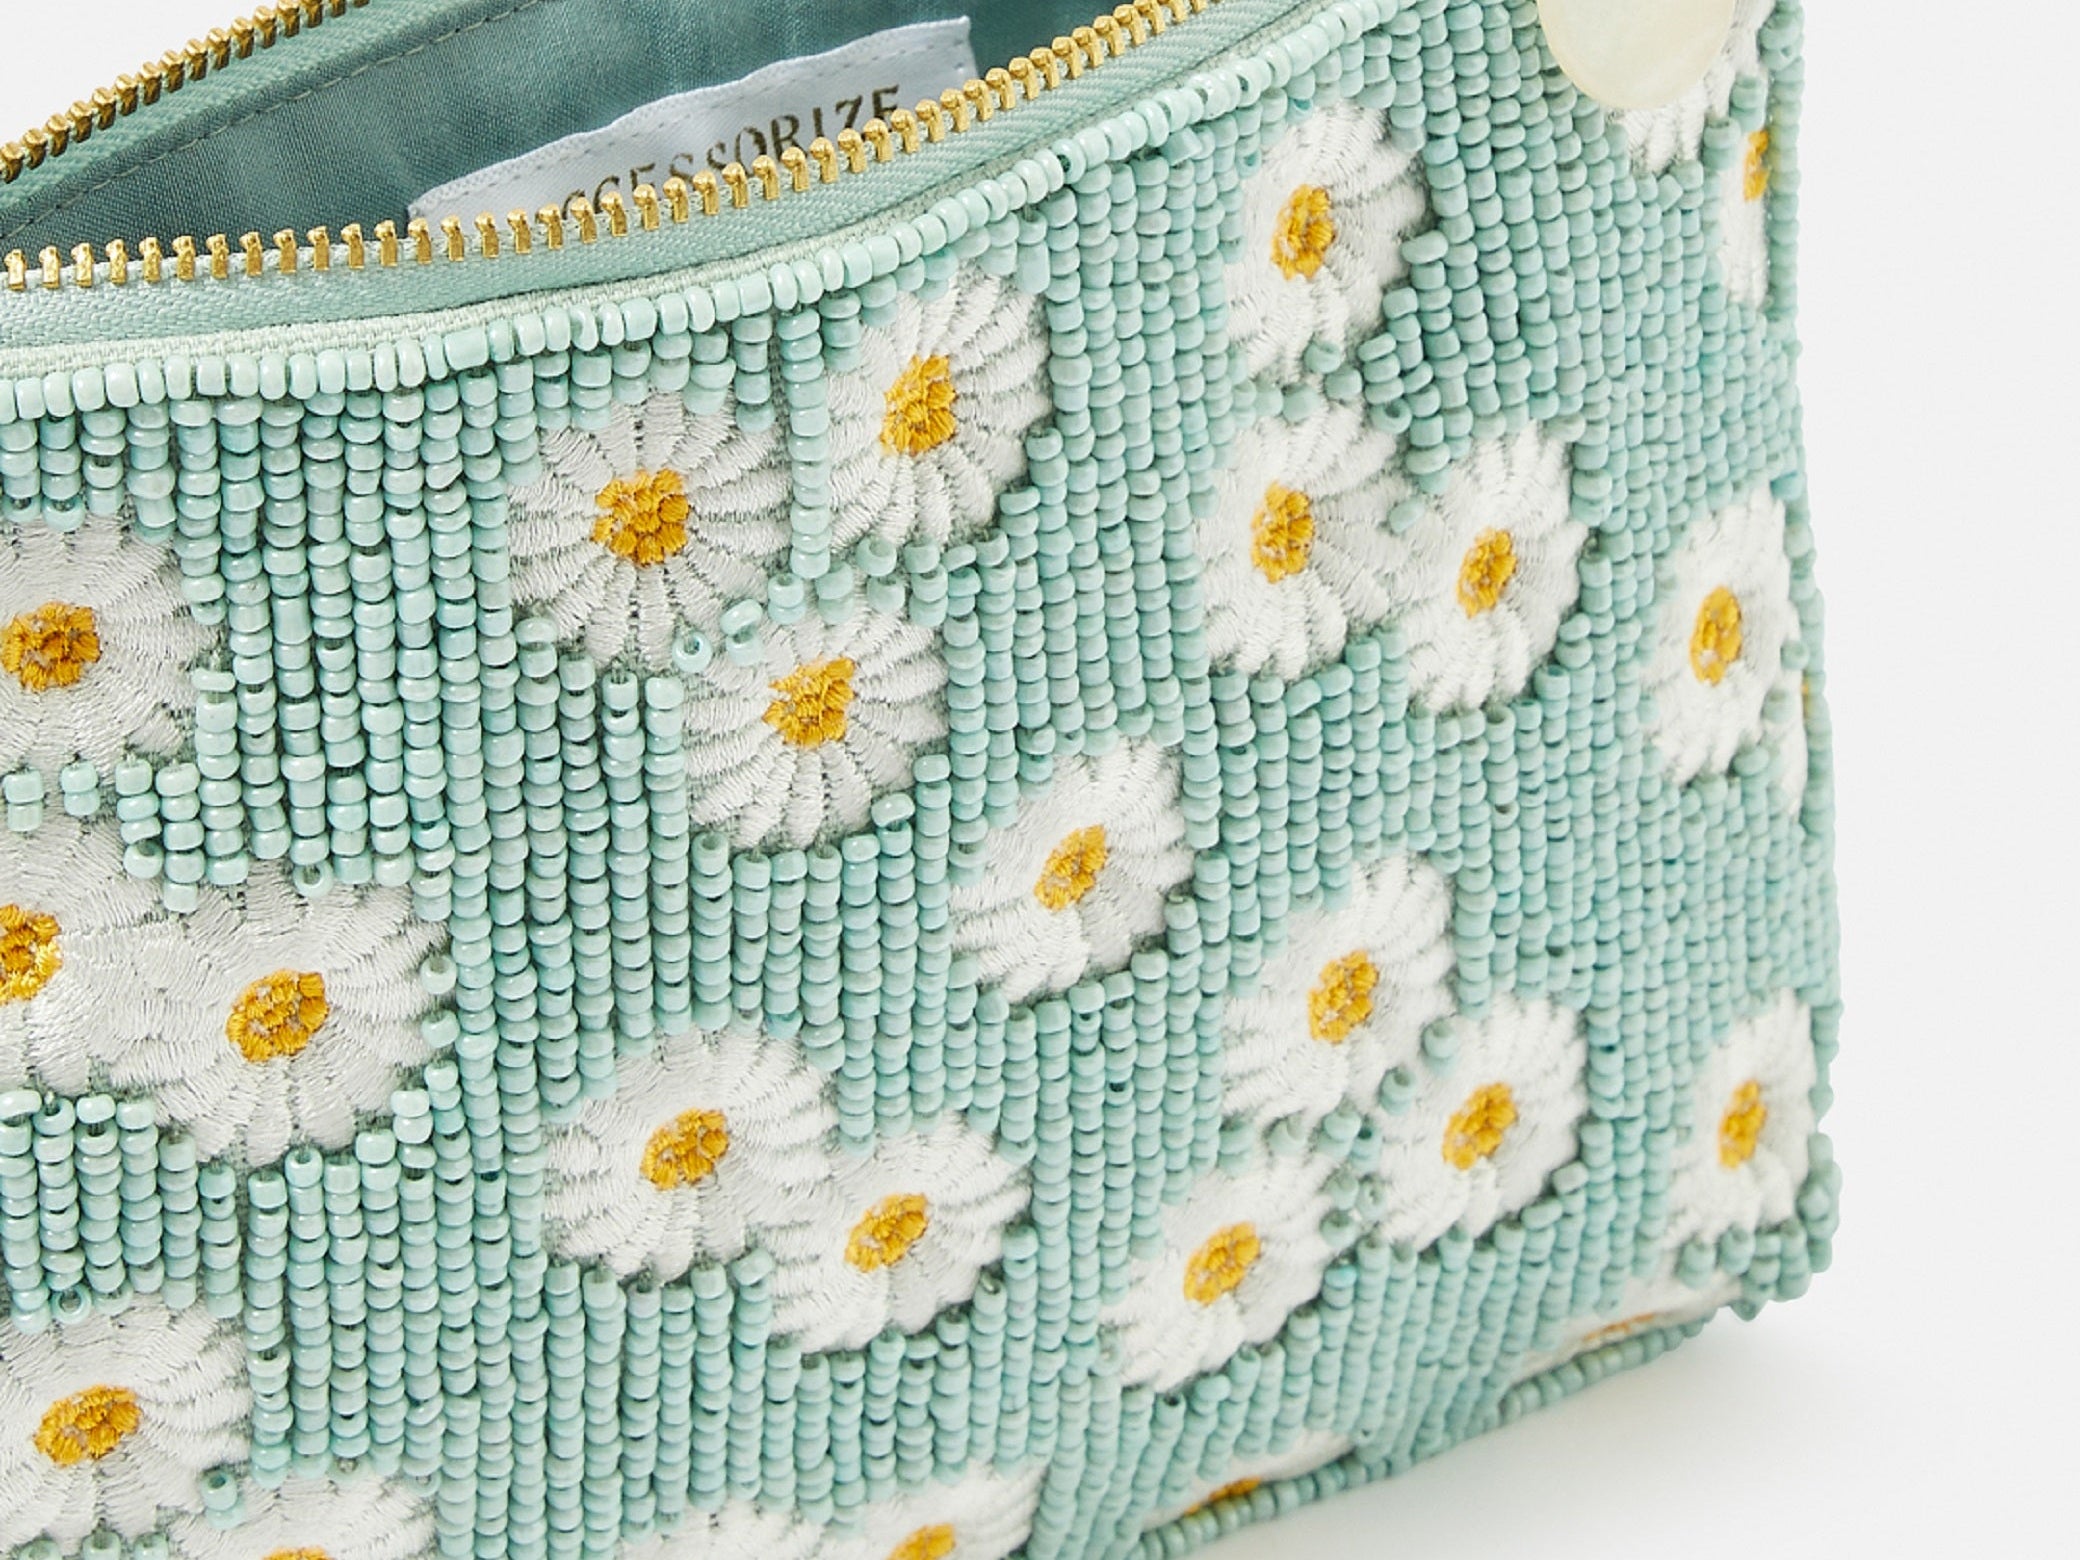 Accessorize London Women's Beaded Green Daisy Embellished PouchMake Up Bag